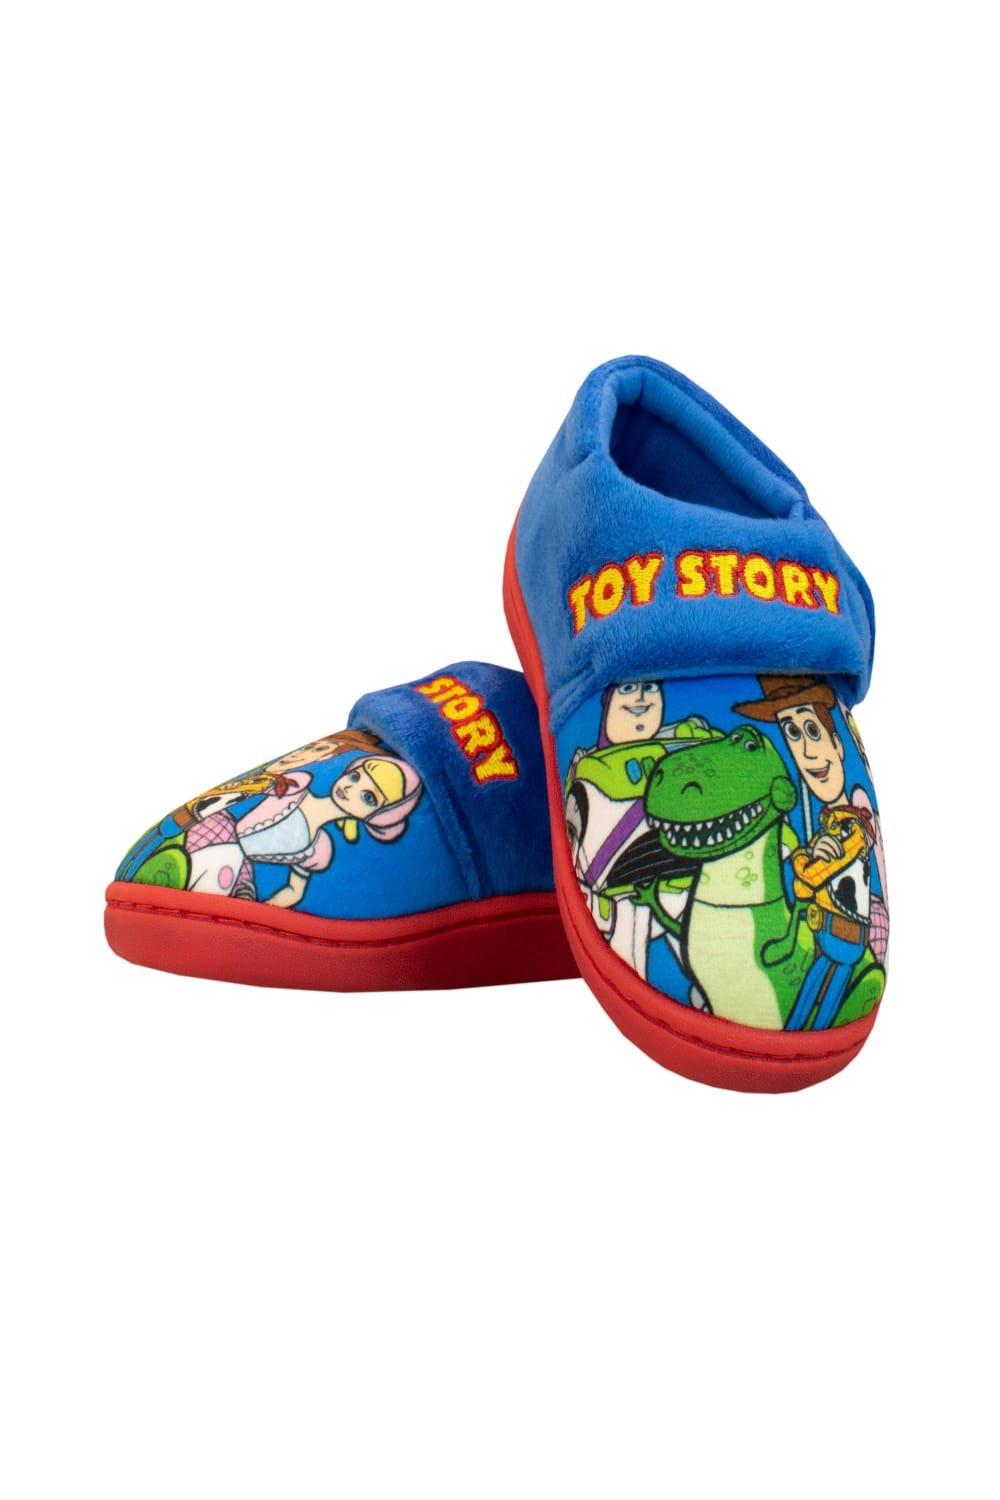 Buzz Lightyear and Woody Toy Story Slippers